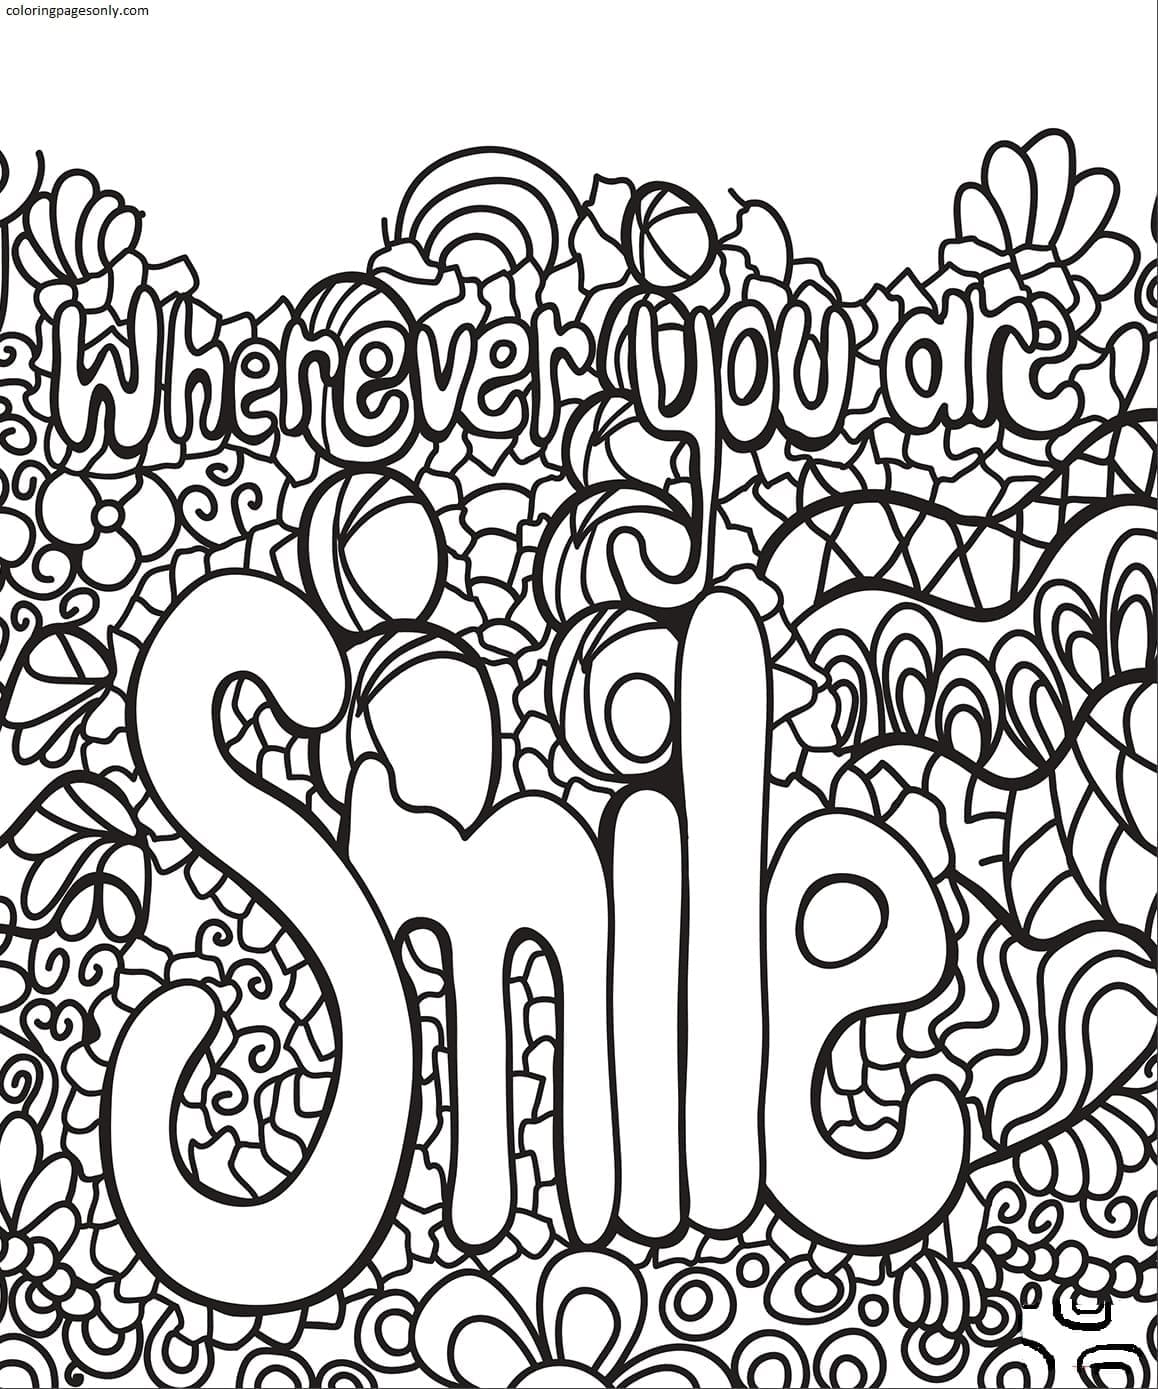 Wherever You are Smile Coloring Page